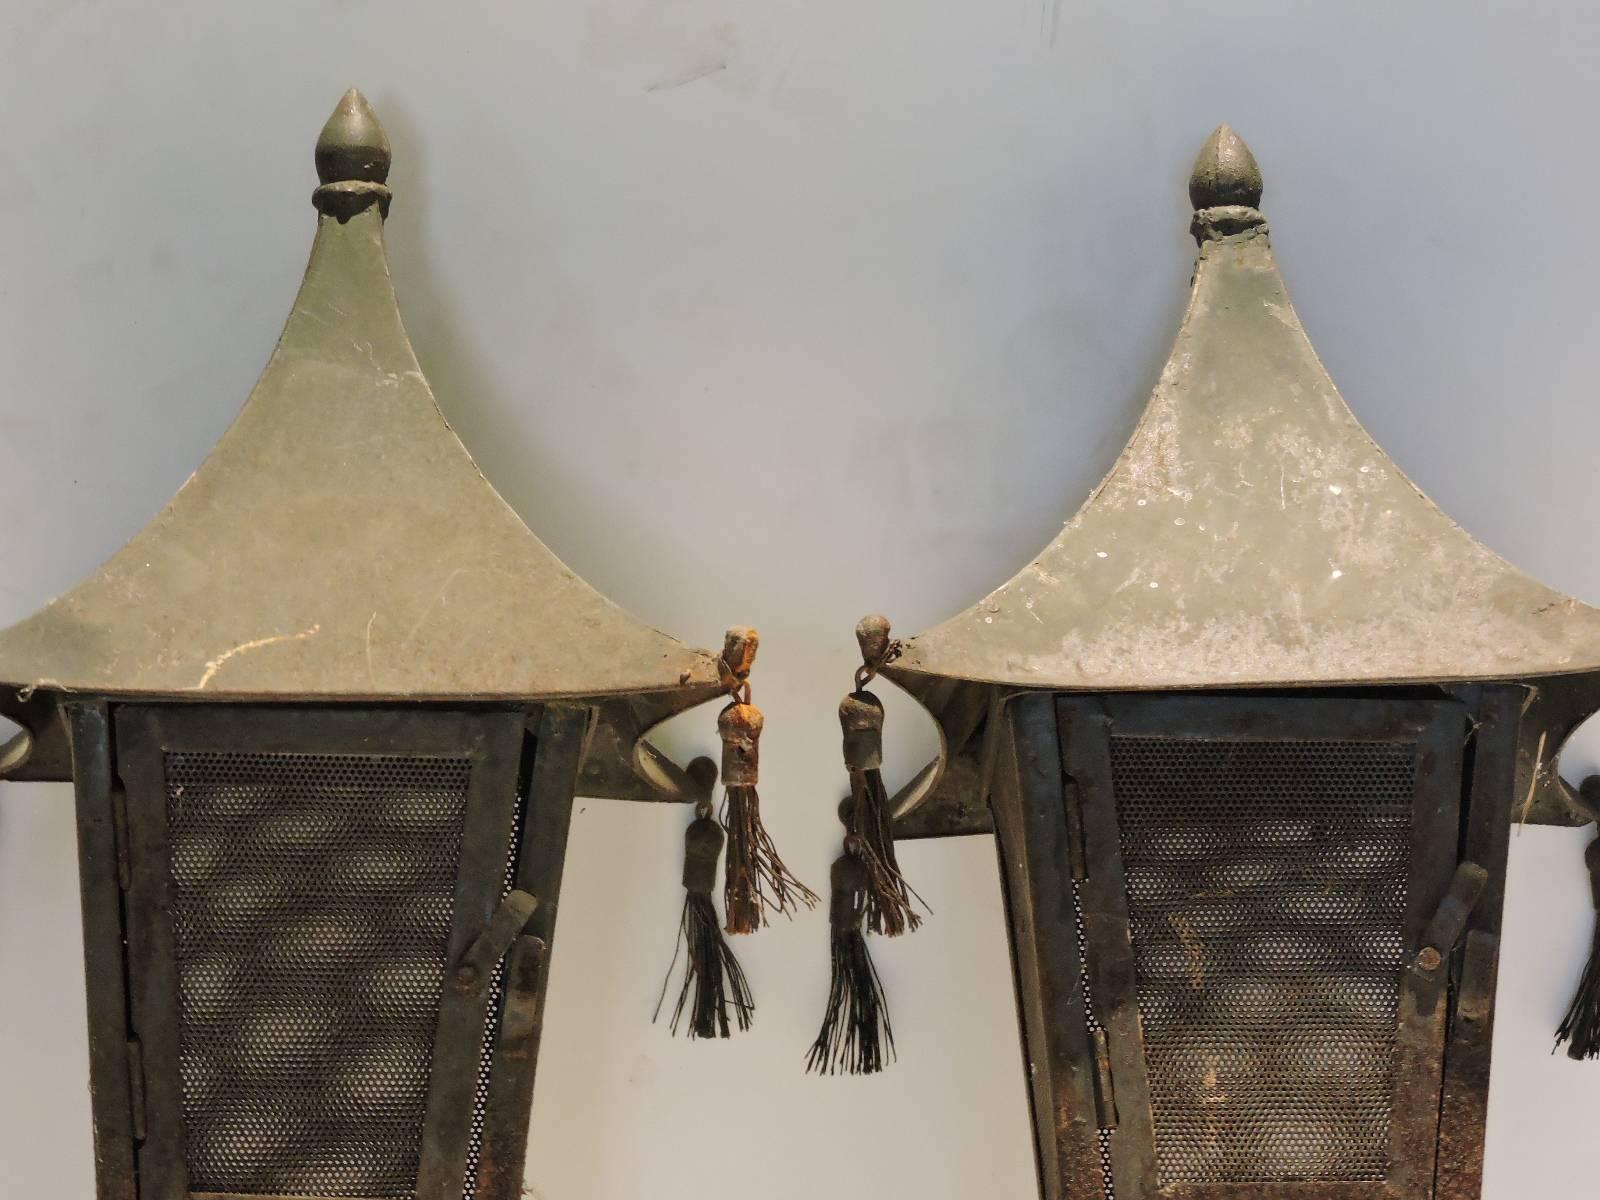 A good looking pair of tin metal pagoda form tasseled candle lanterns in original old worn aged gray to slightly green painted surface with areas of rust from being exposed to the outside elements for many years.